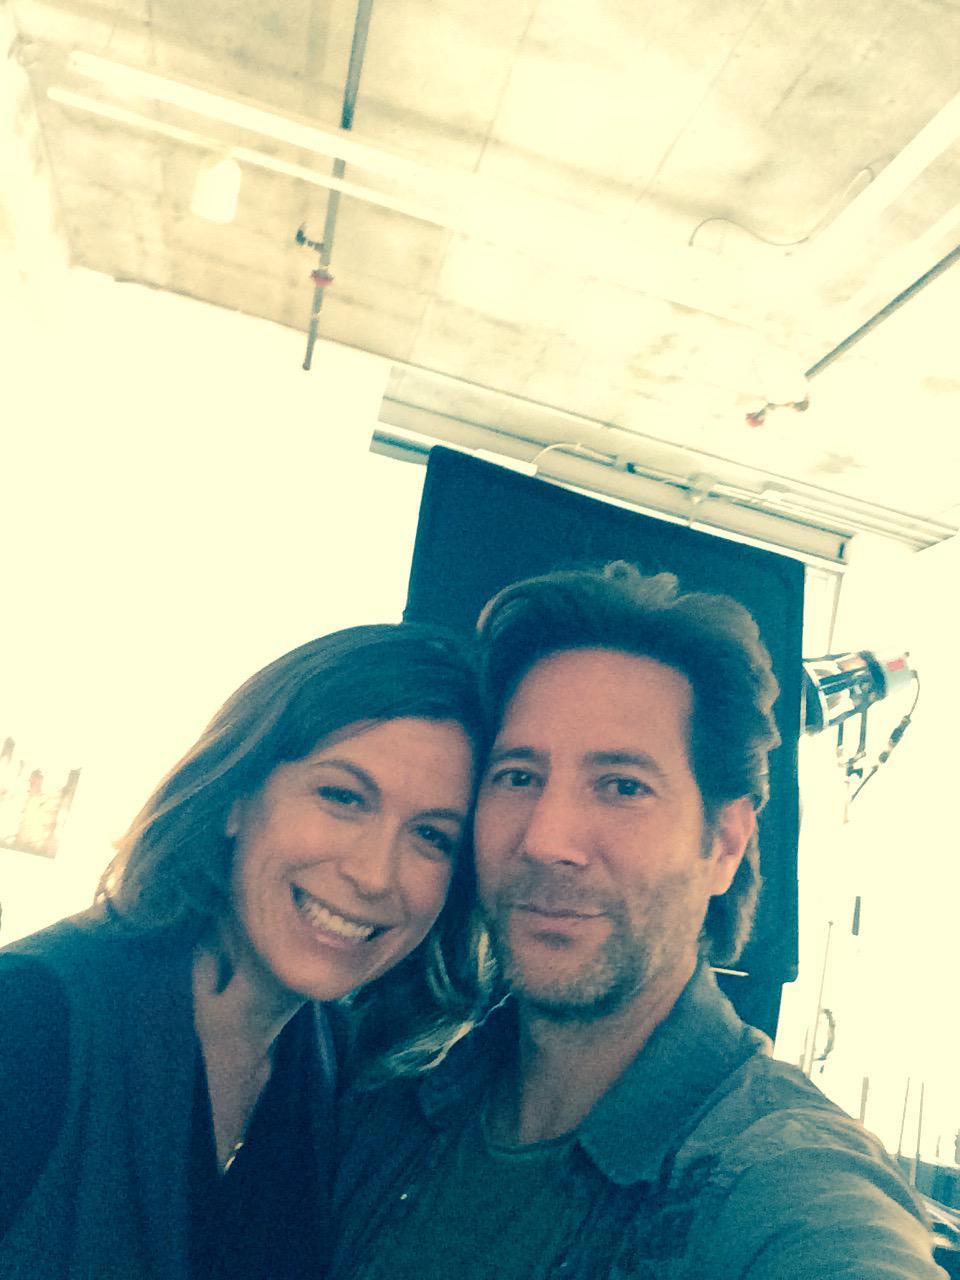 catastrofe:
“fuckyeahlost:
“Sonya Walger on Twitter: Reunited! #Lost #Visiblemovie #PennyandDesmondforever
Sonya and Henry are reuniting for Visible, a science fiction love story.
”
SEE YOU IN ANOTHA LIFE BROTHA
”
We have to go back!